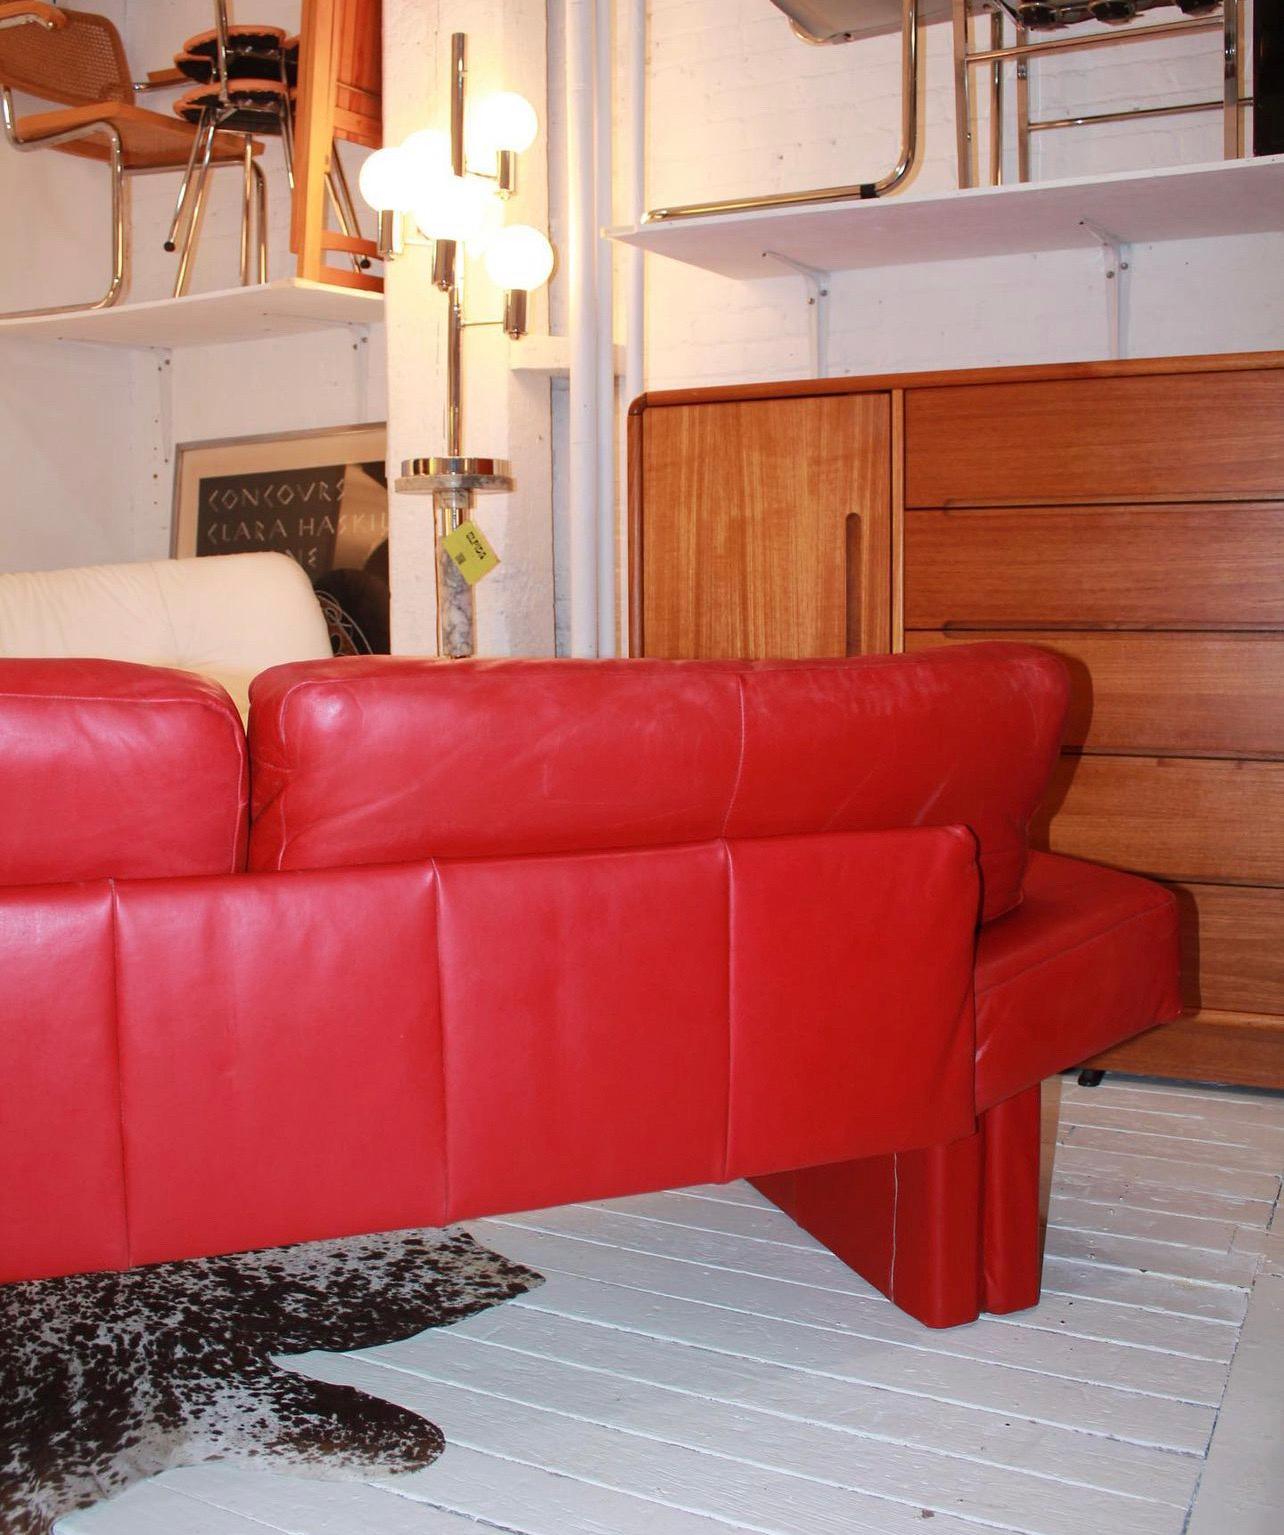 Post-Modern Post Modern Red Leather Sofa by Flep S.P.a. Bitonto, Made in Italy For Sale